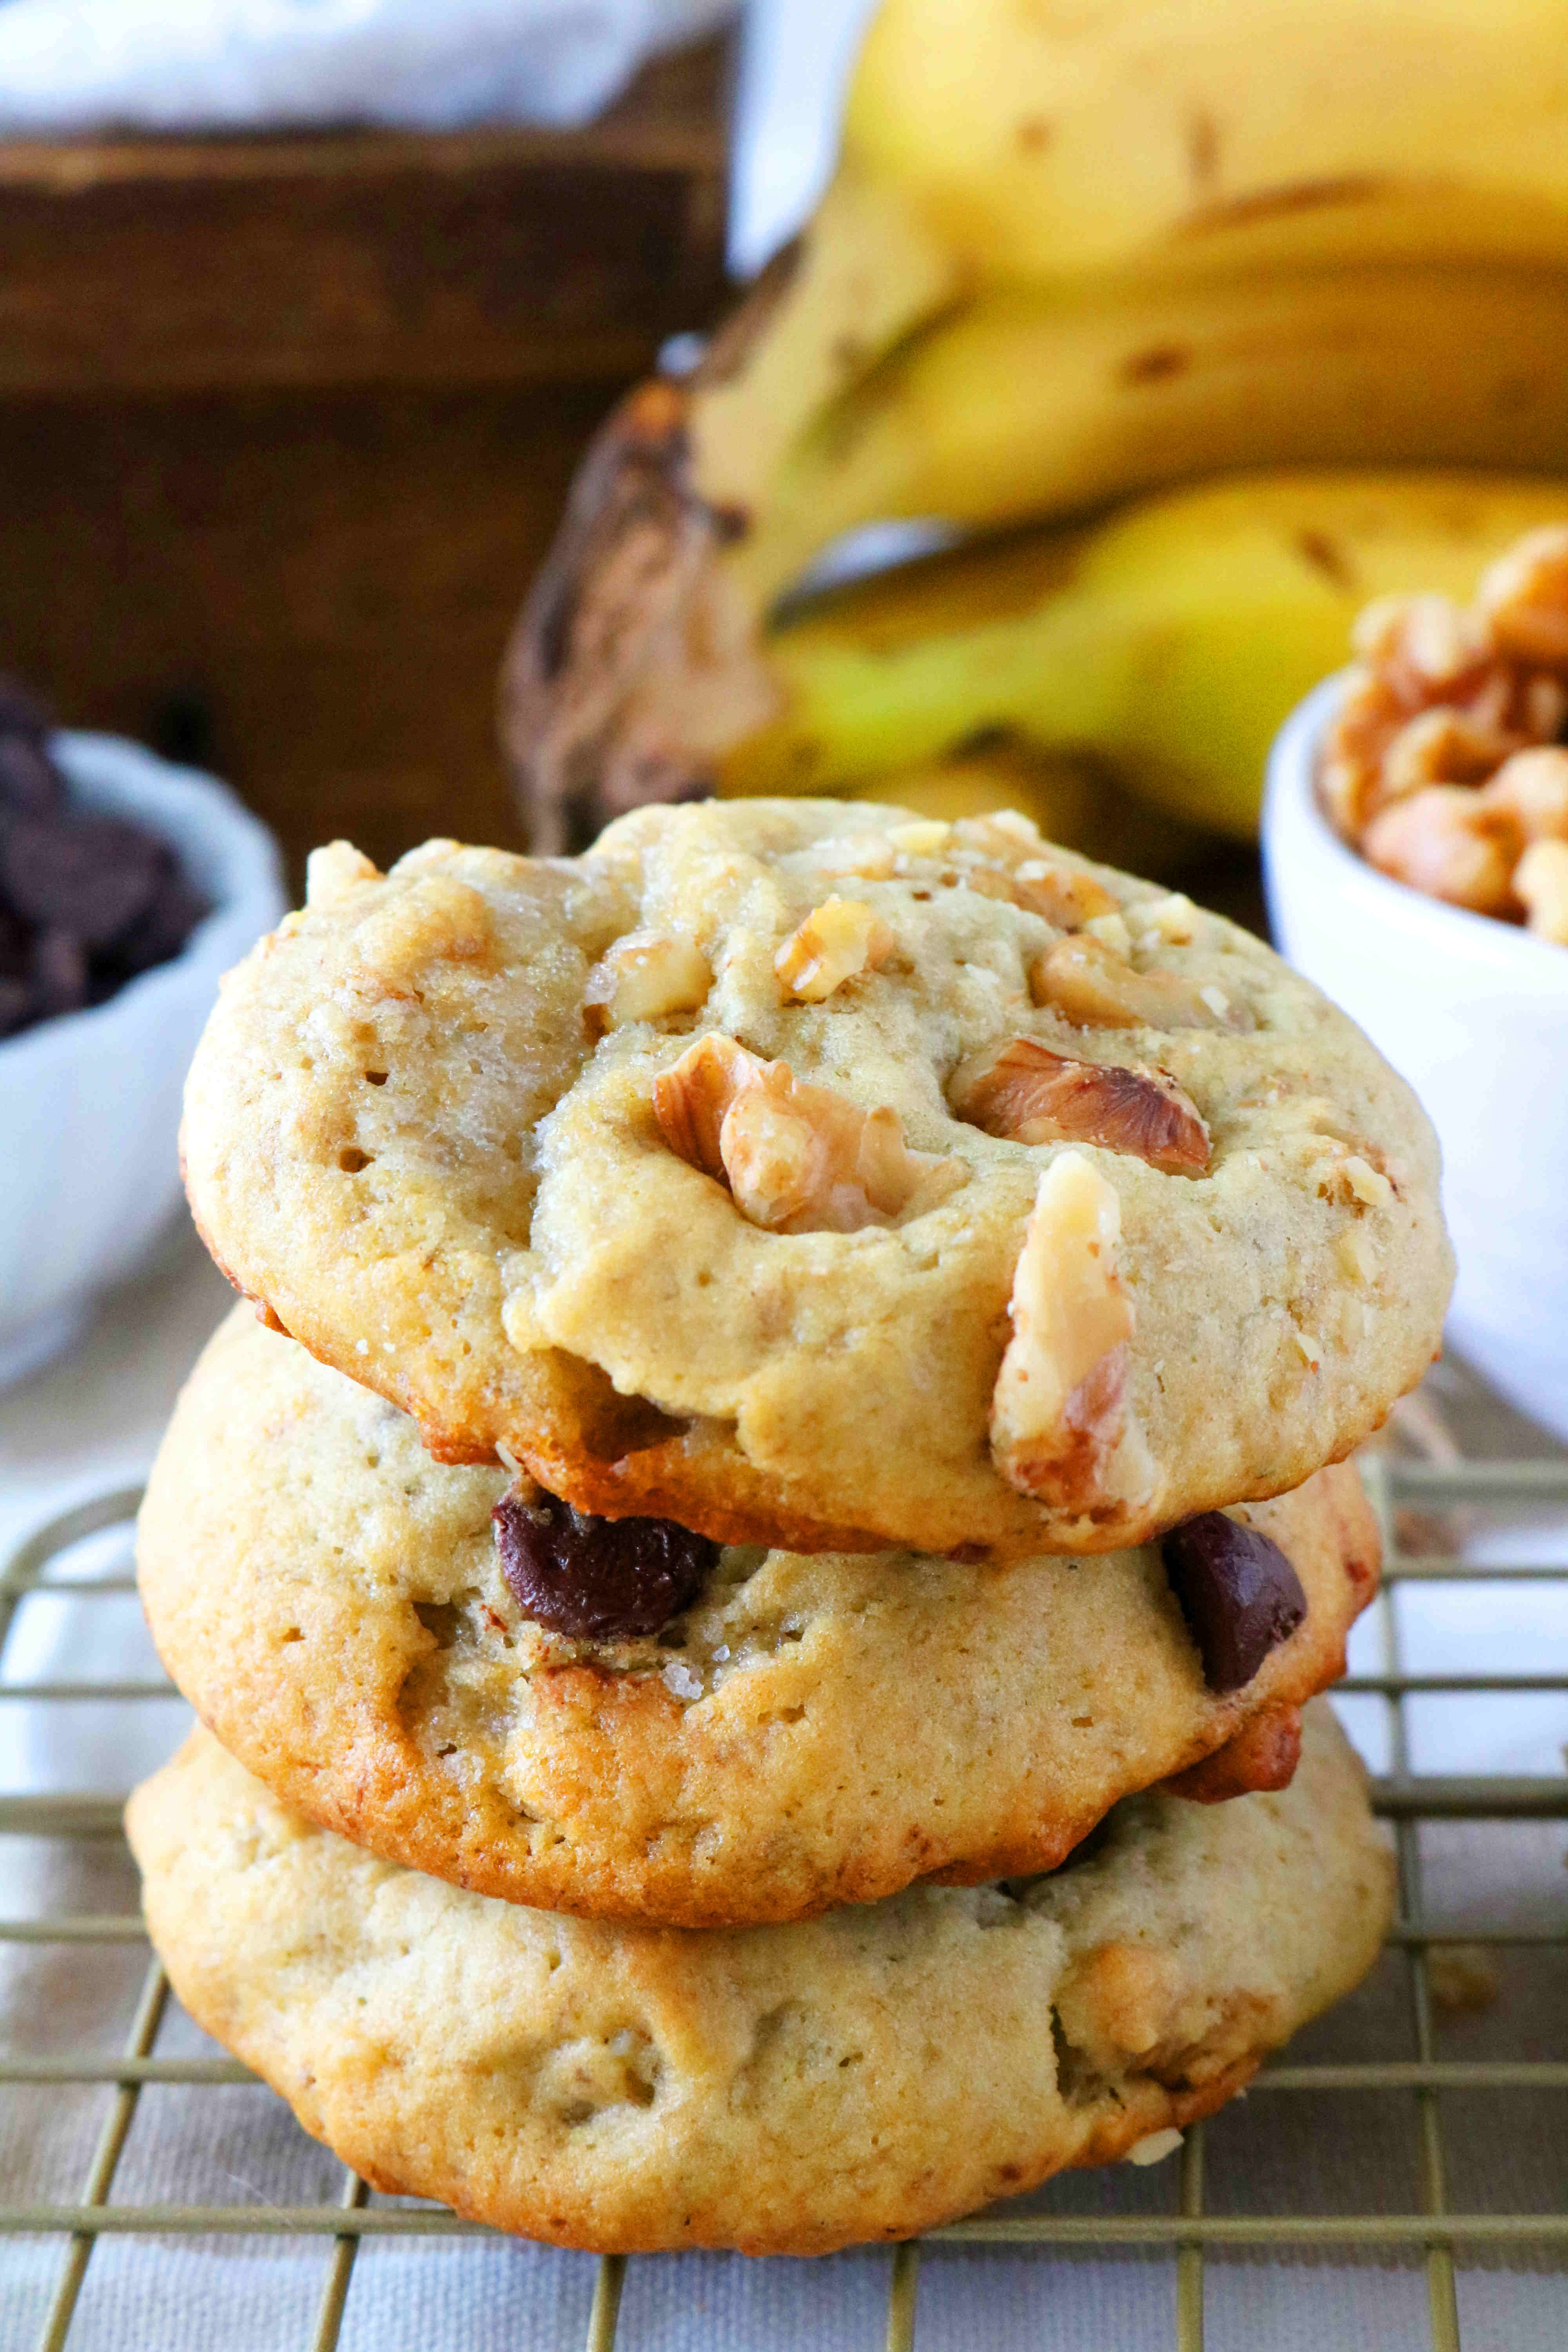 Banana Cookies Recipe (with Chocolate Chips) - The Anthony Kitchen